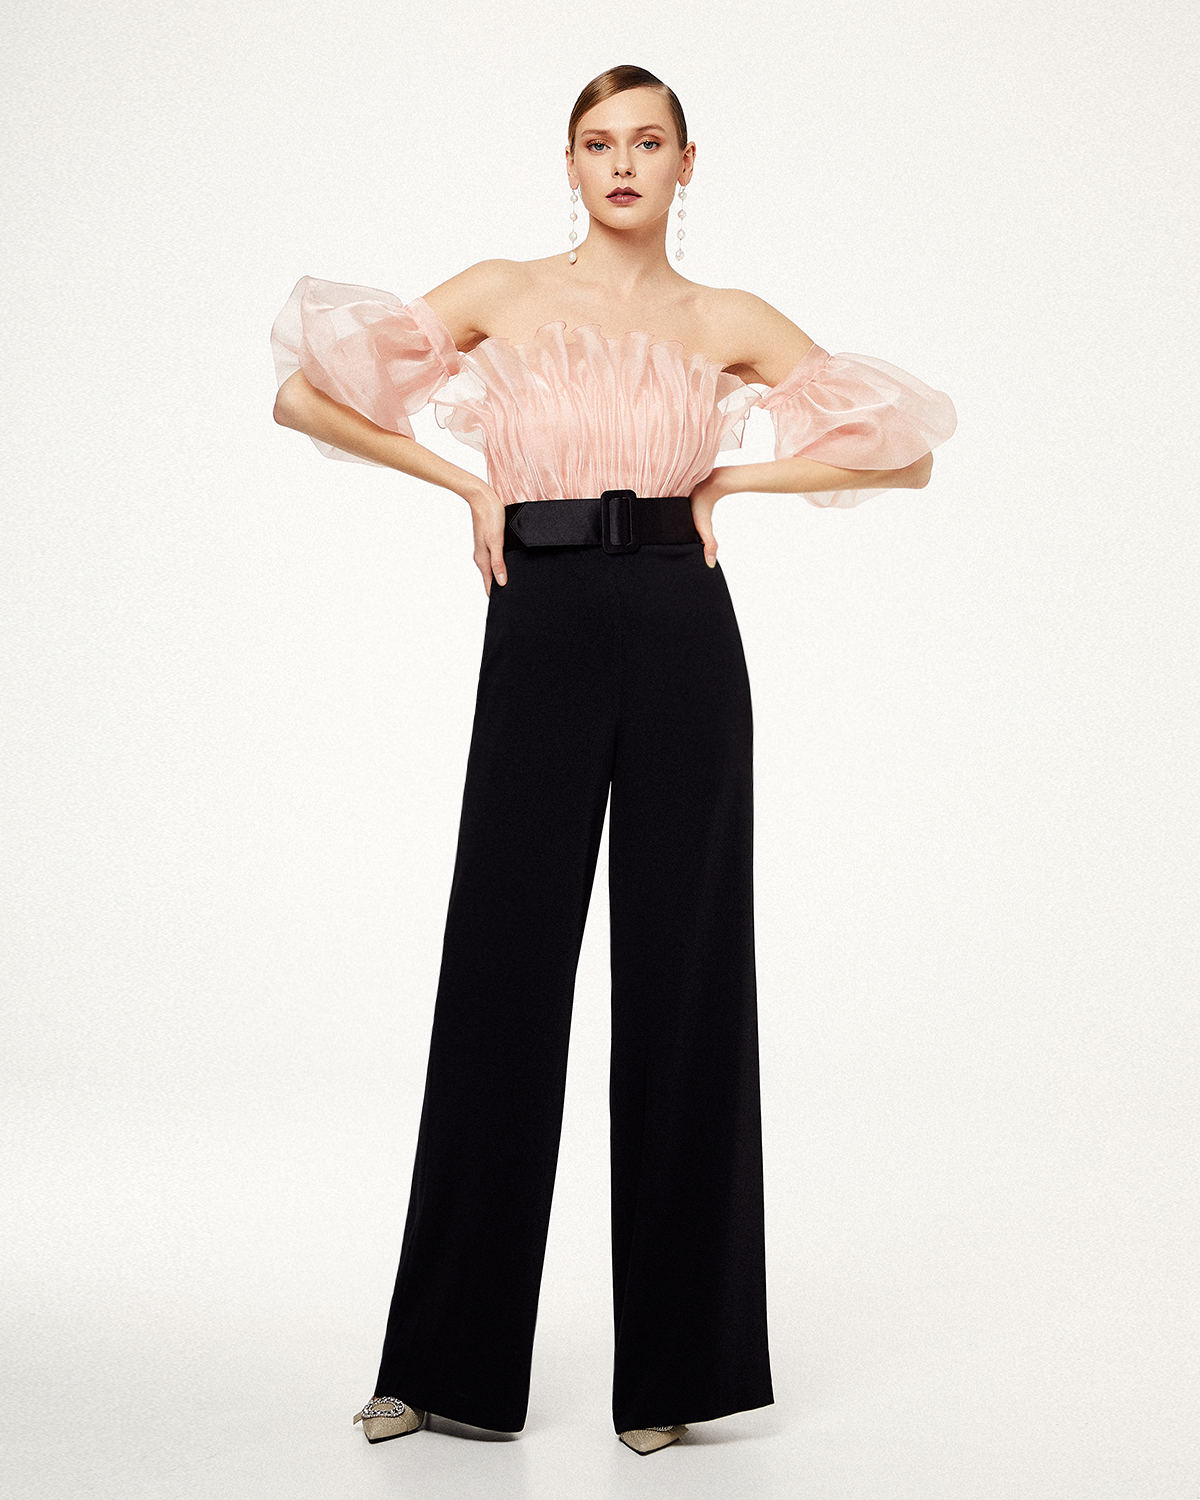 ANNMARIE - Cocktail jumpsuit with organza top and belt